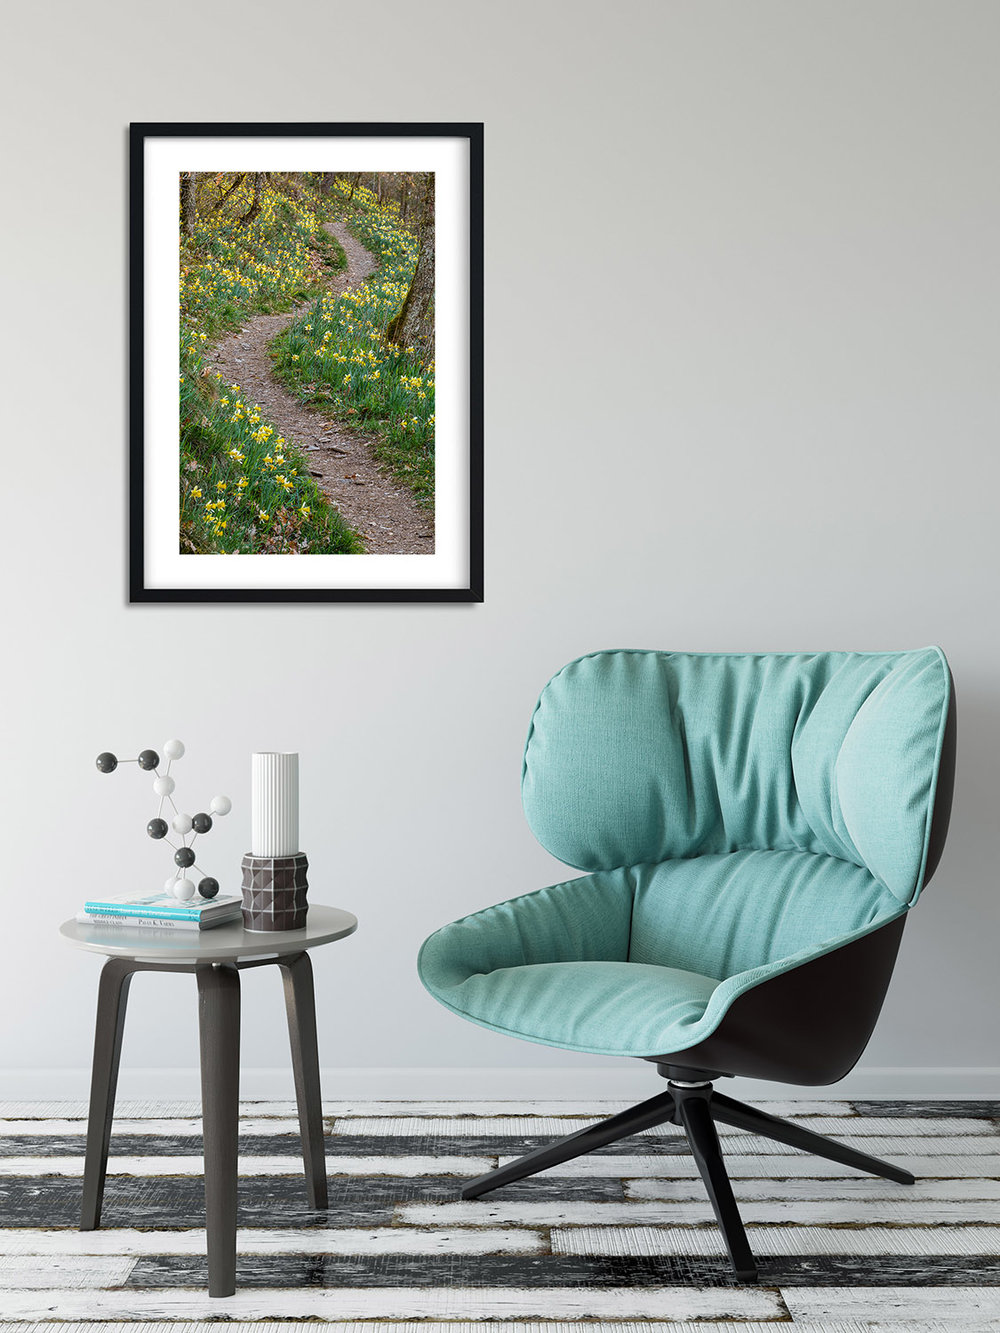 Luxembourg Retirement Gift - Limited Edition Fine Art Print